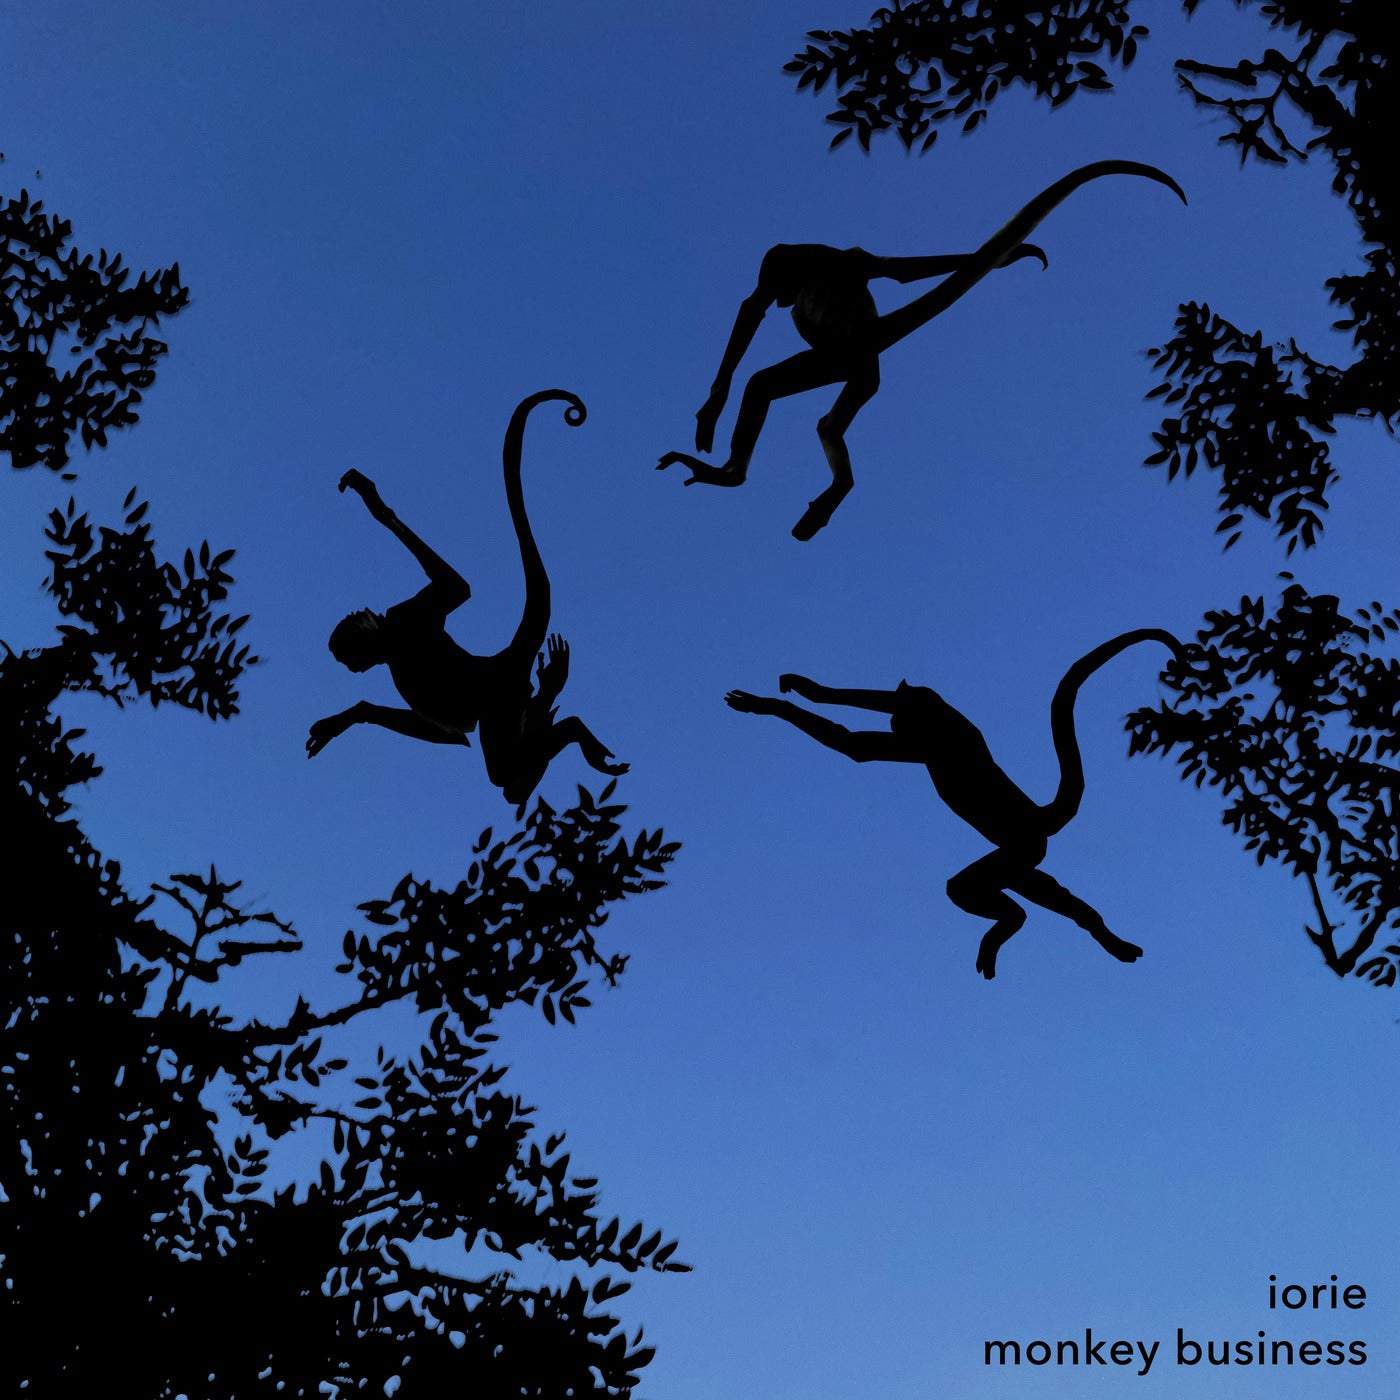 Download Iorie - Monkey Business on Electrobuzz